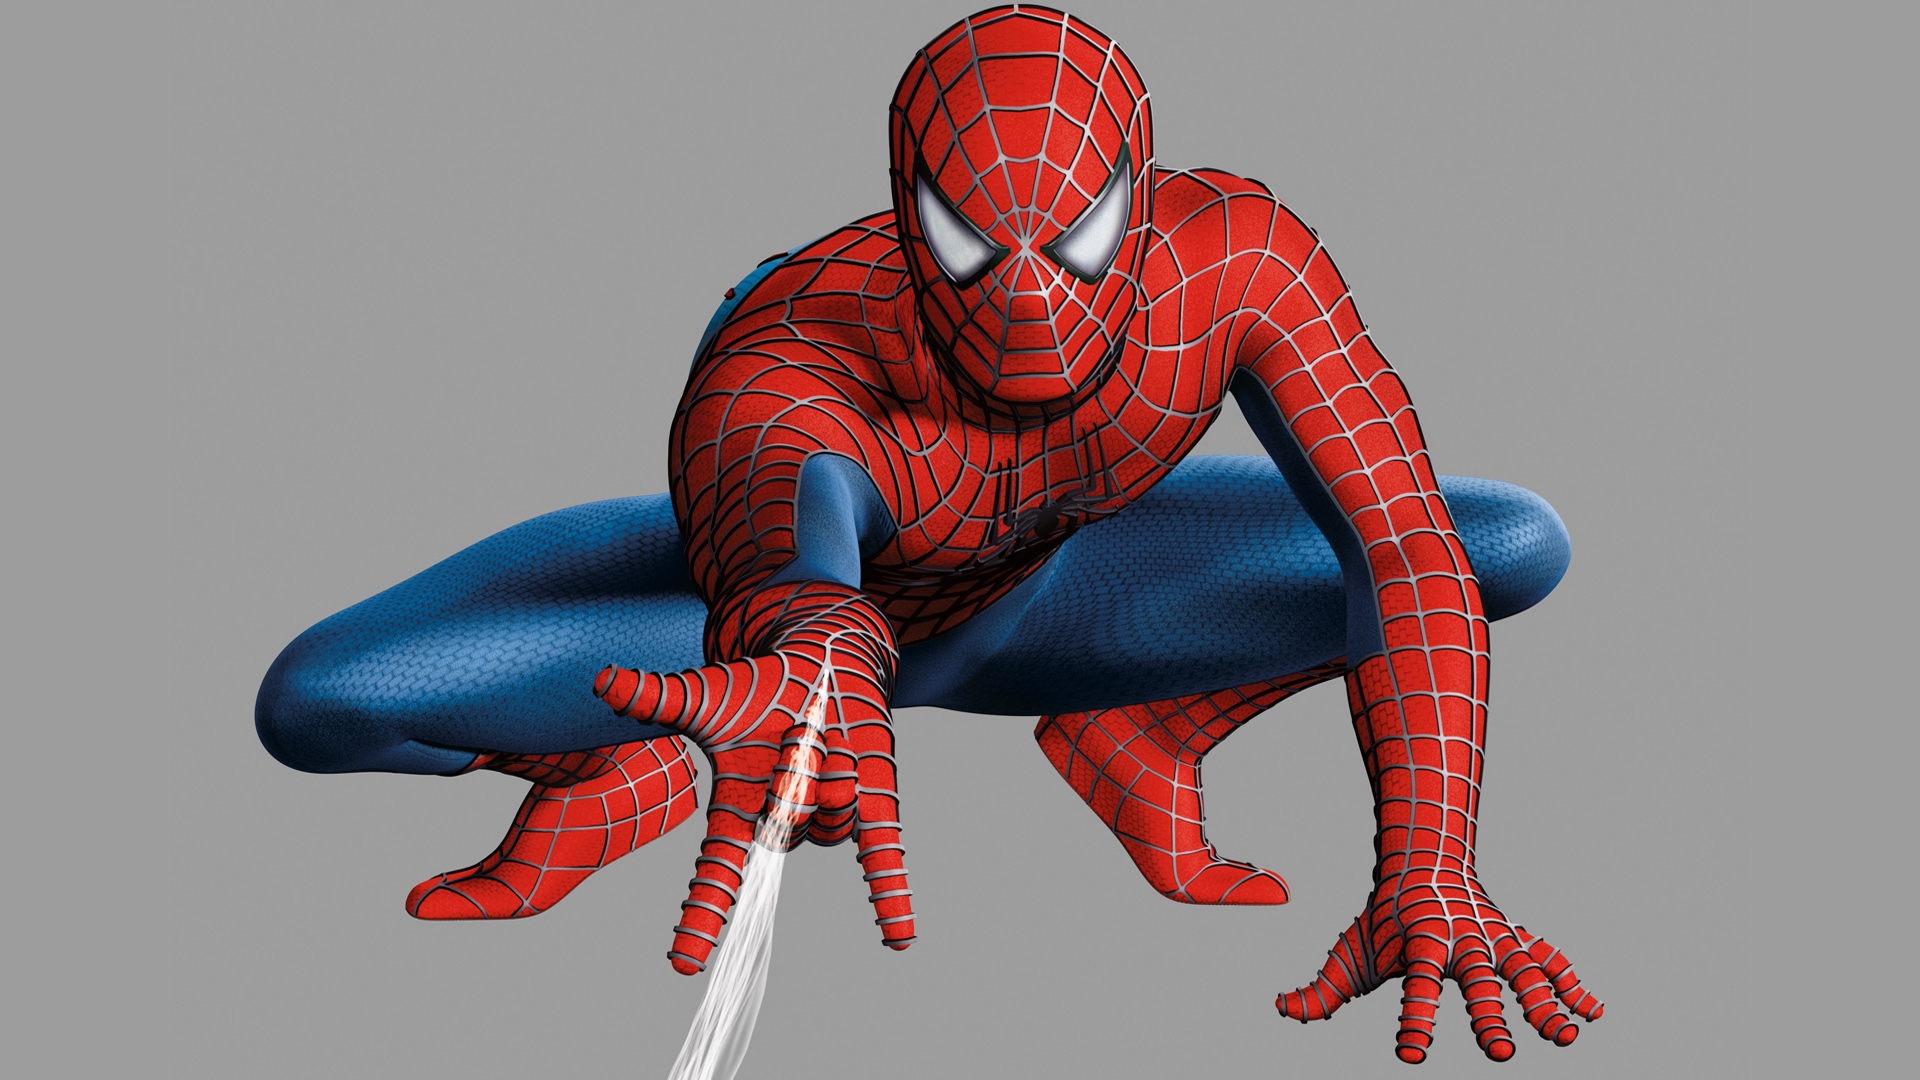 Spiderman 4 - High Definition Wallpapers - HD wallpapers